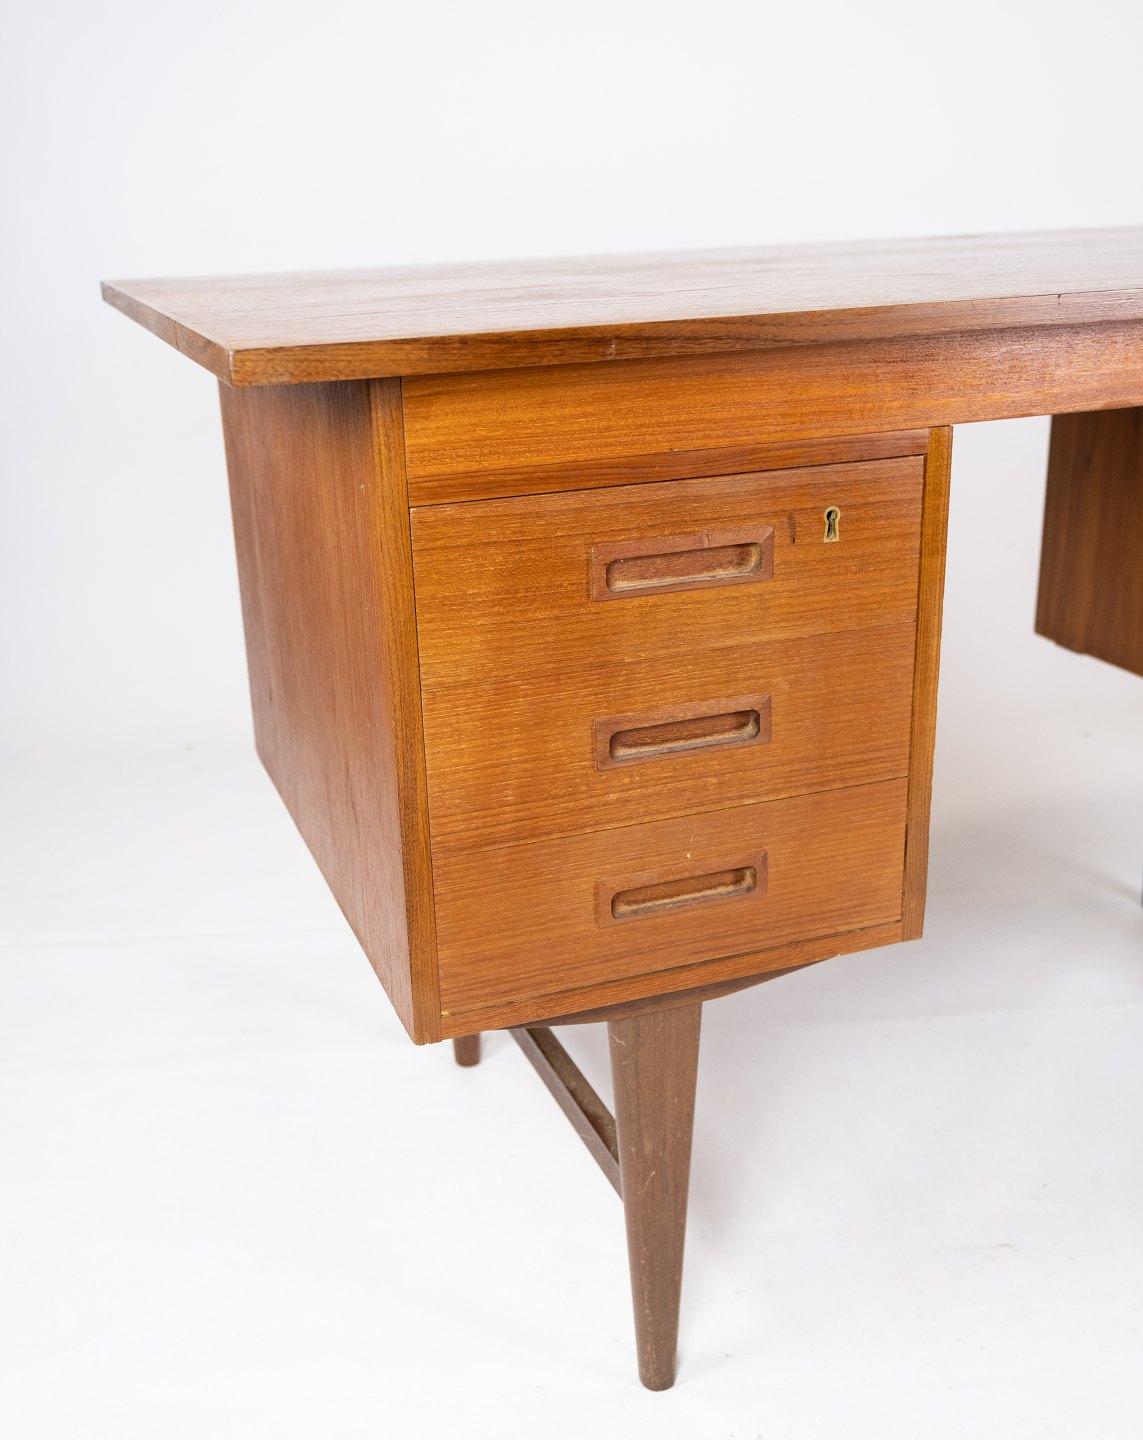 This desk is an example of Danish design from the 1960s and is made of teak wood, which gives it a natural and timeless look. The beautiful golden color and unique wood grain add character and warmth to any room. With its simple, yet elegant design,